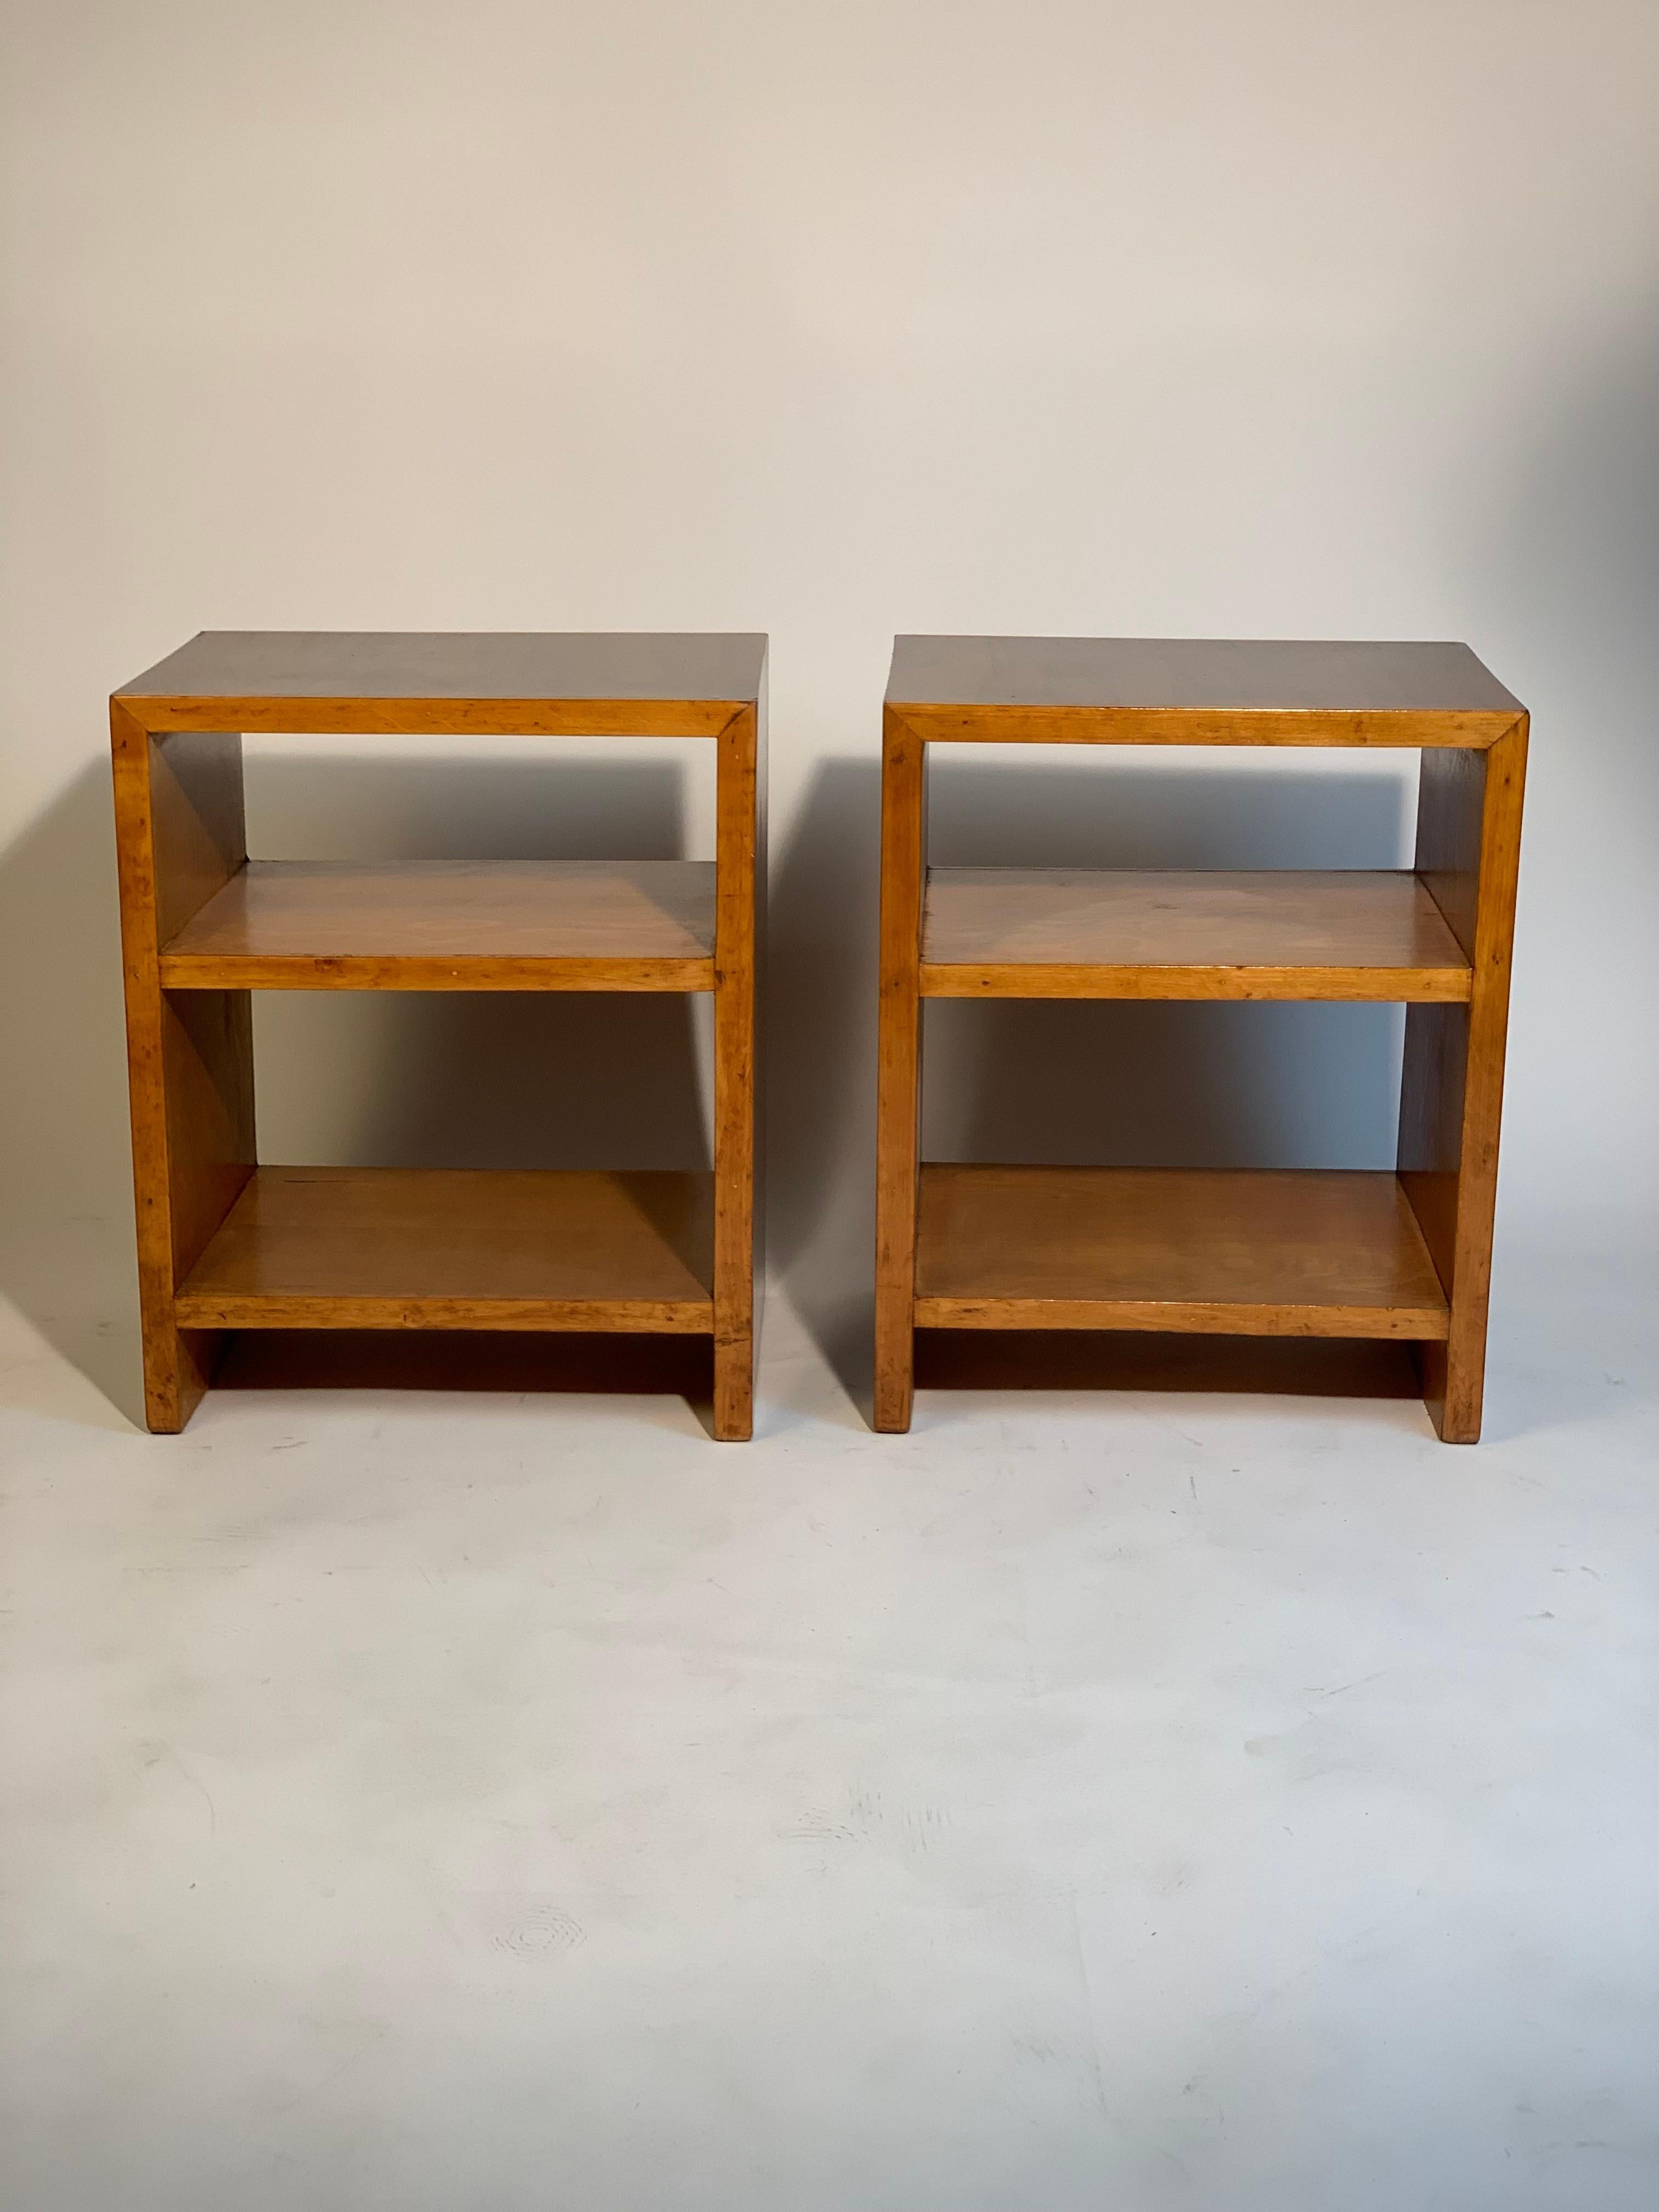 Italian Art Deco Pair Of Double Shelve Side Table Or Bed Tables 1